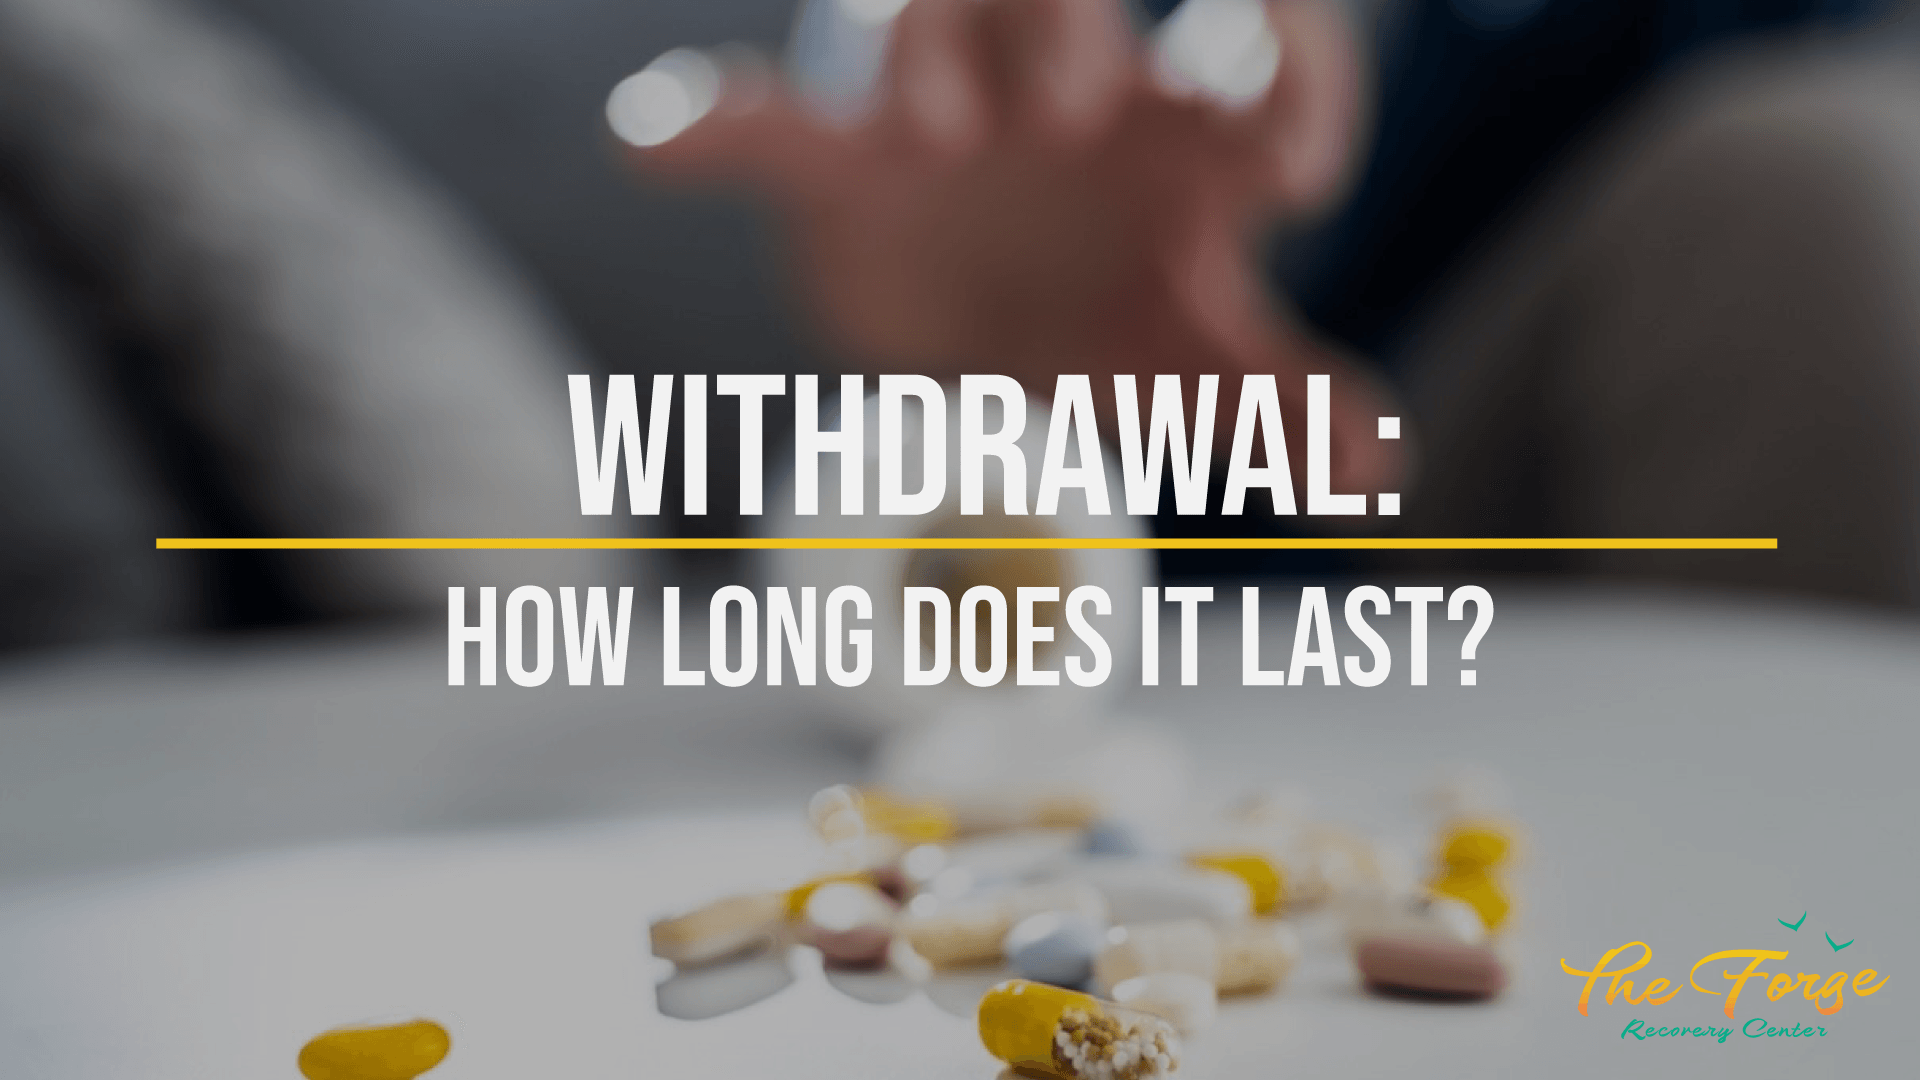 How Long Does Withdrawal From Drugs & Alcohol Last?